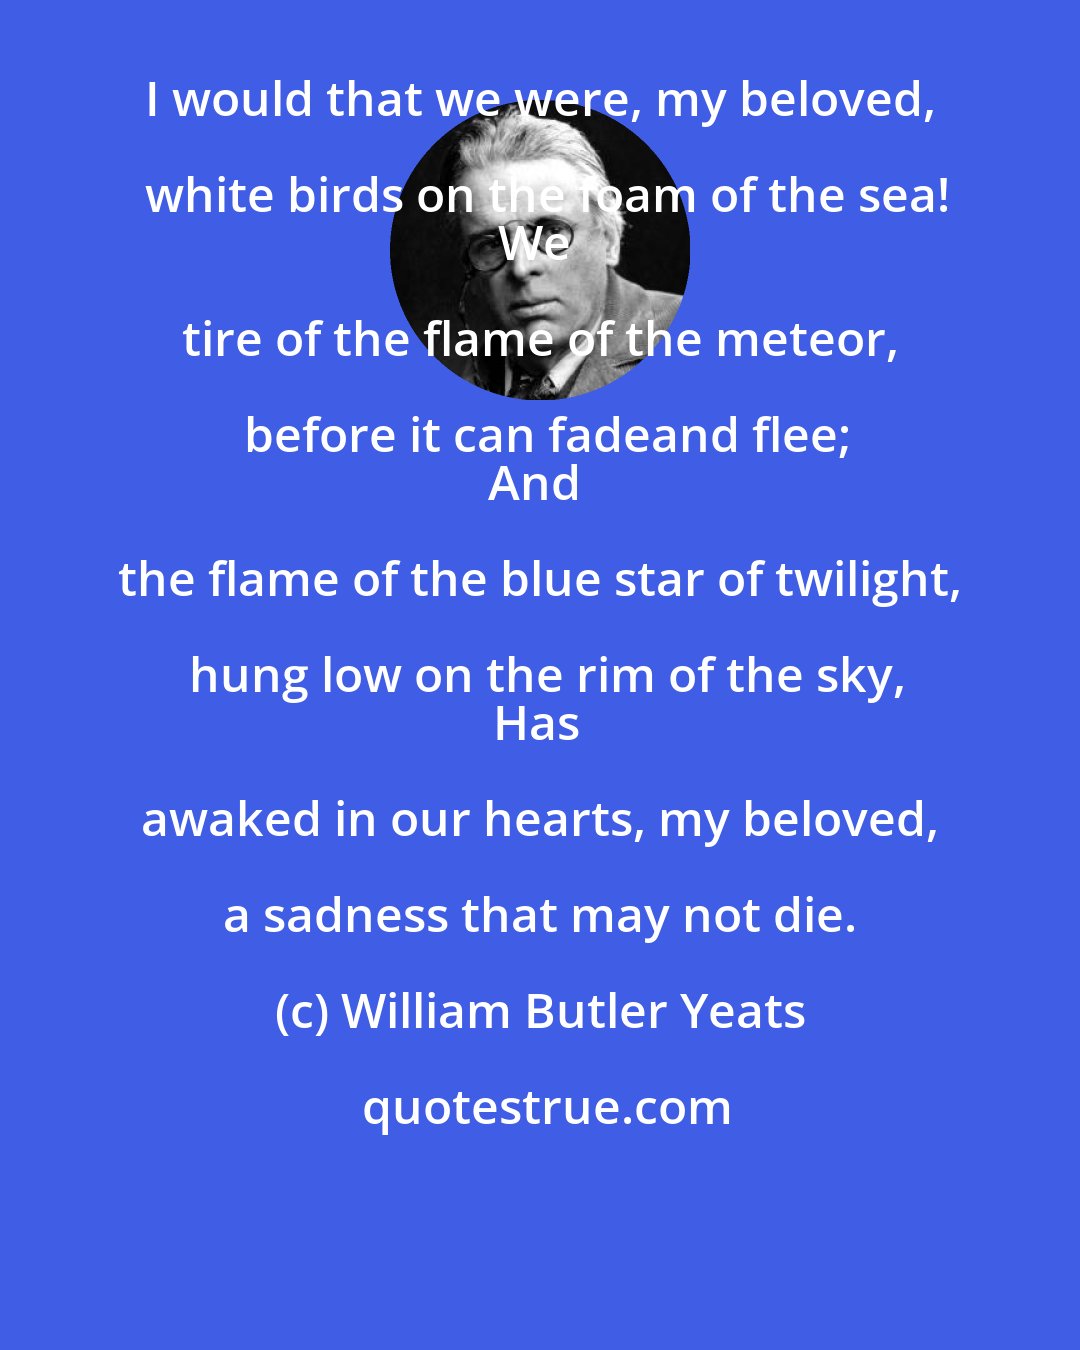 William Butler Yeats: I would that we were, my beloved, white birds on the foam of the sea!
We tire of the flame of the meteor, before it can fadeand flee;
And the flame of the blue star of twilight, hung low on the rim of the sky,
Has awaked in our hearts, my beloved, a sadness that may not die.